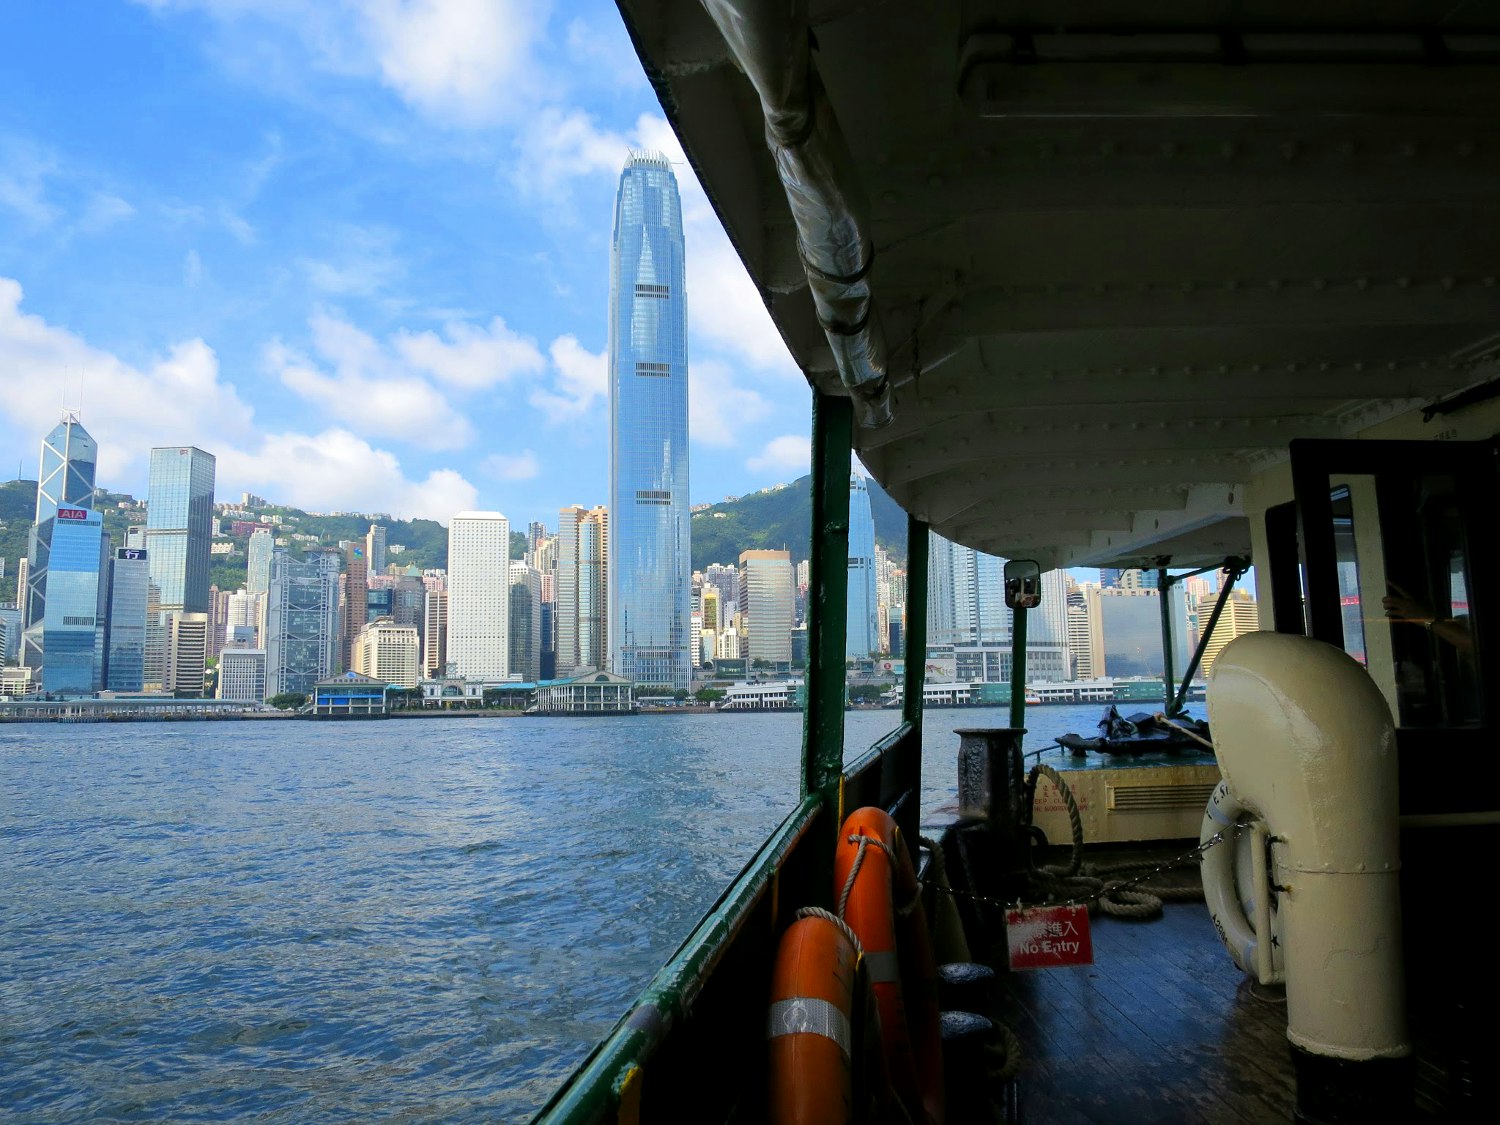 Skyscrapers tower above during a Star Ferry ride. Image by Megan Eaves / Lonely Planet